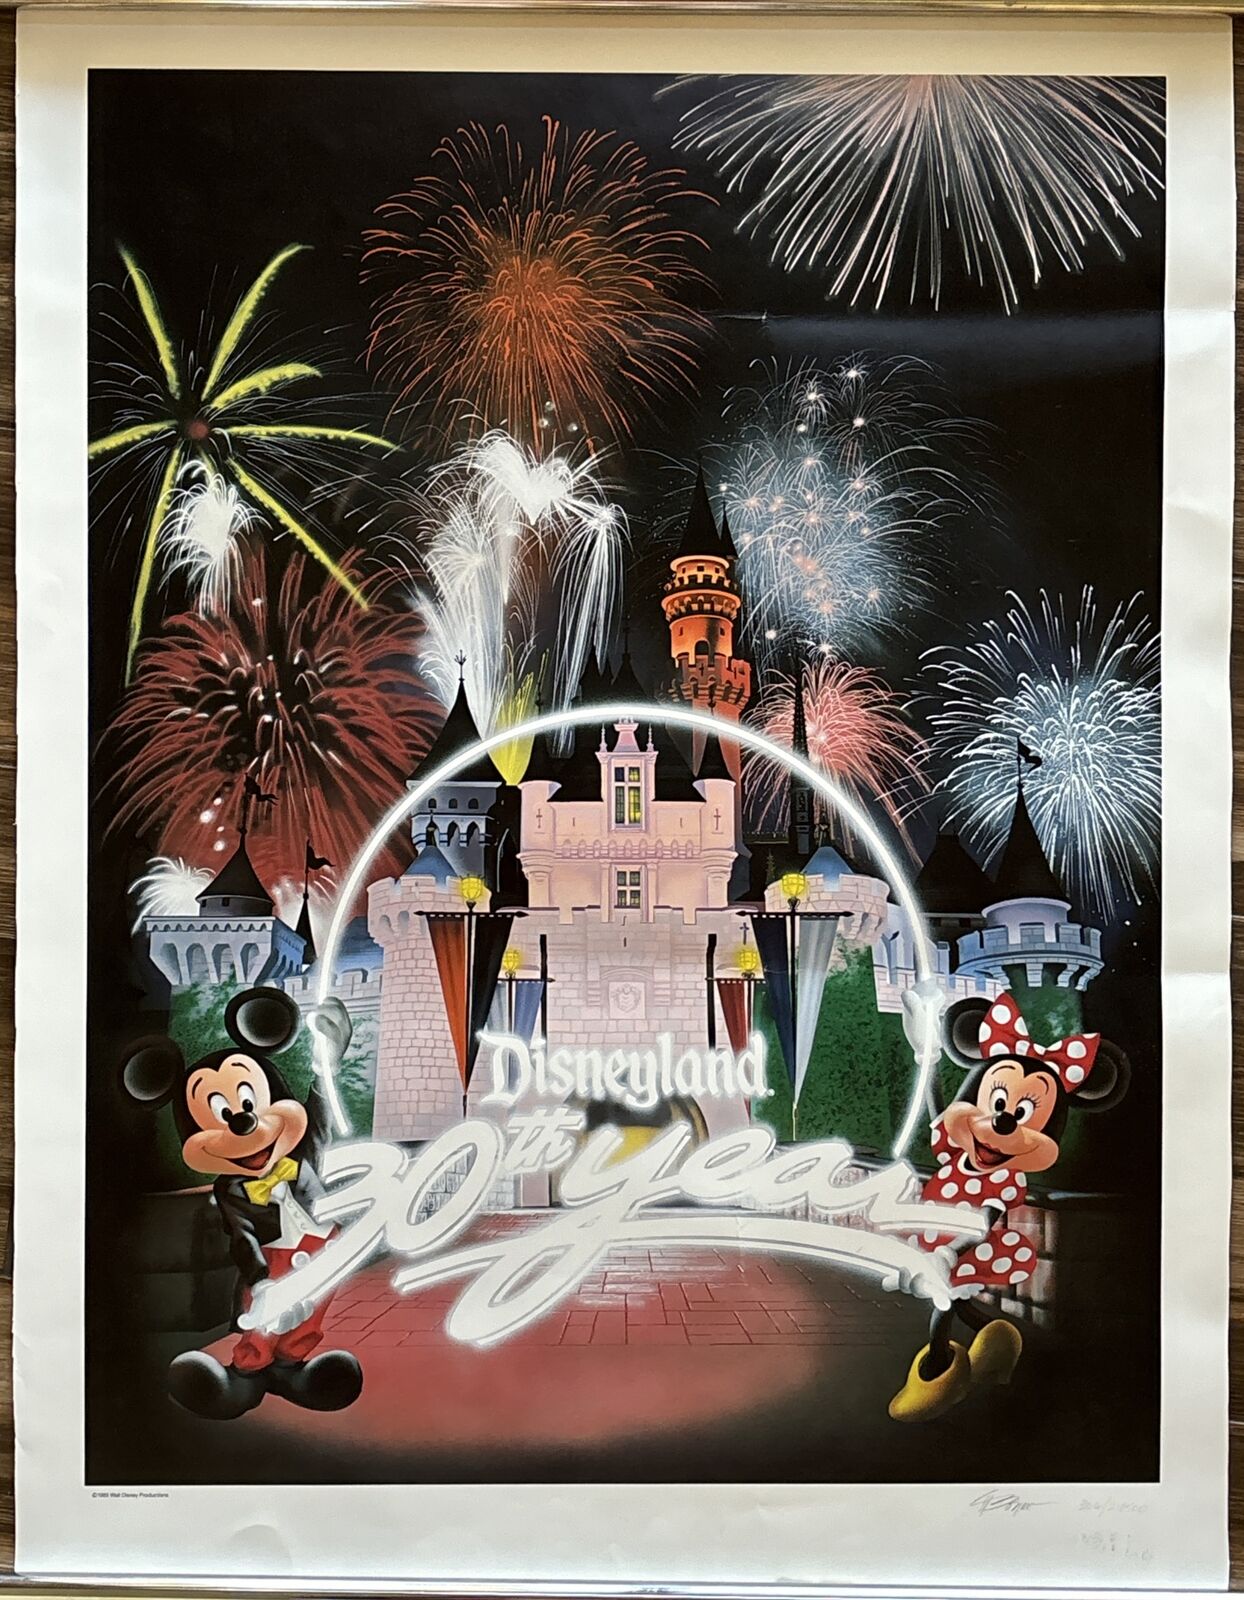 Disneyland 30th Year Poster 1985 - Signed by Charles Boyer - Numbered /24,500